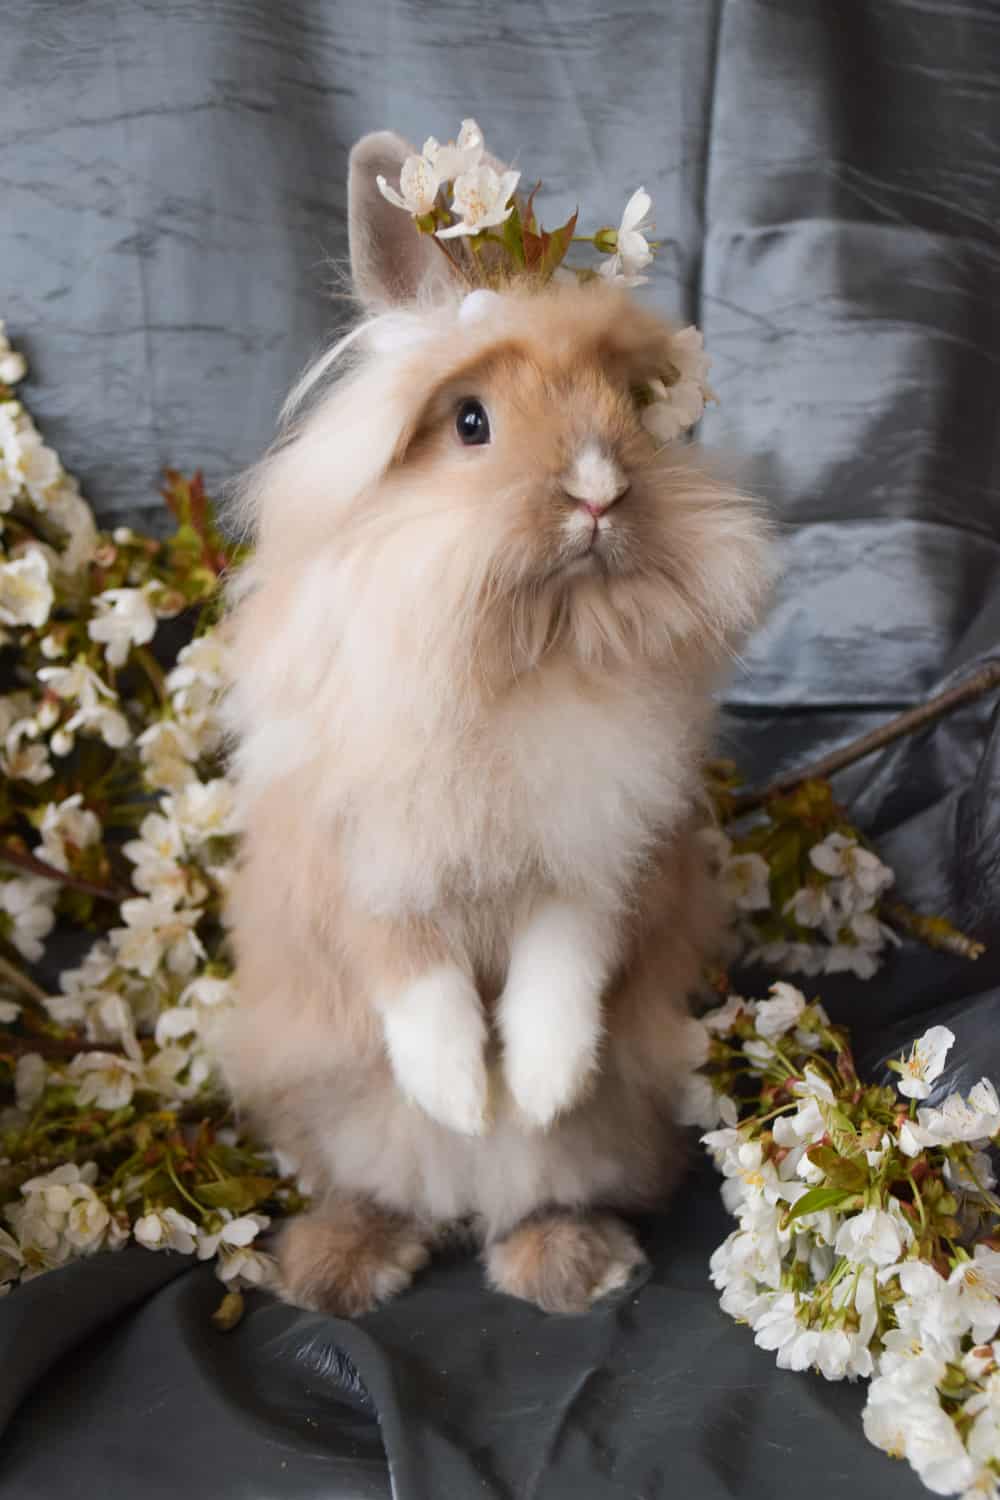 How Much Does a Lionhead Rabbit Cost